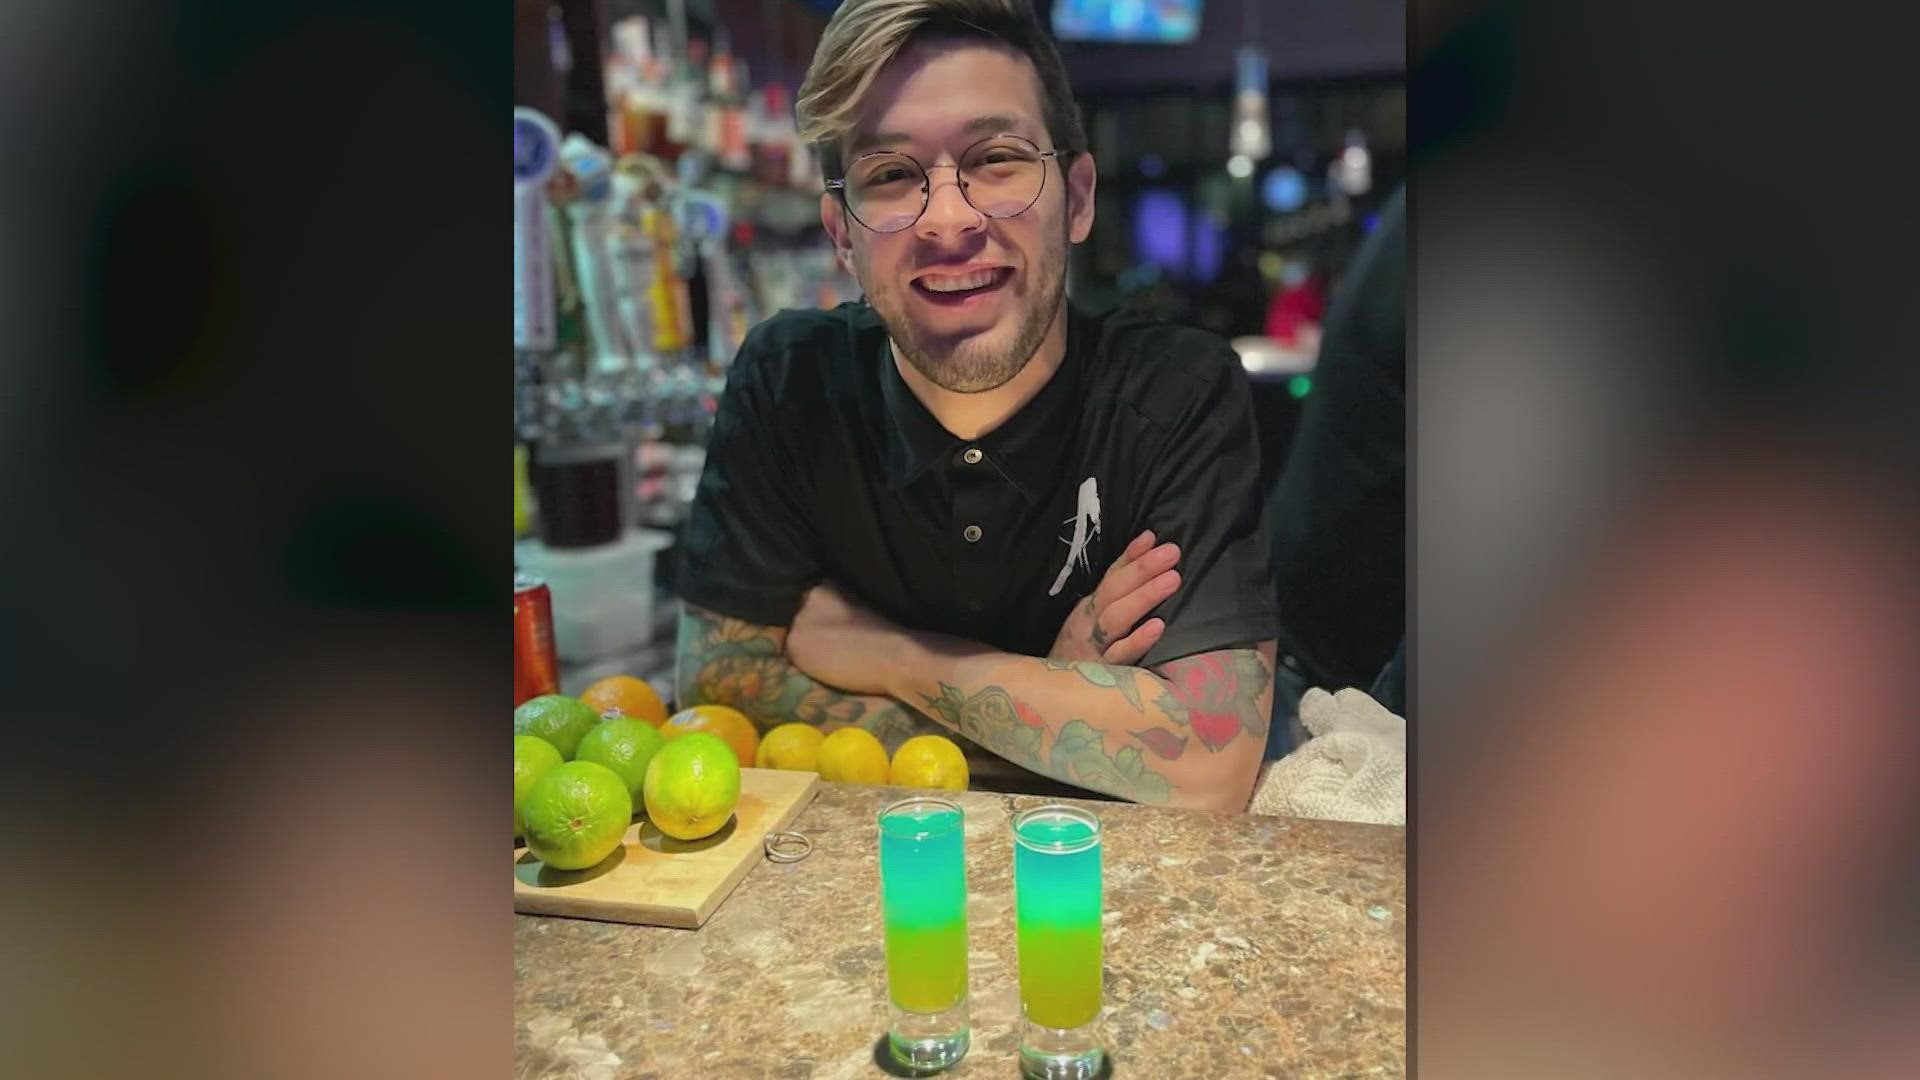 At Alexandre's in Oak Lawn, Dallas, bartenders are mixing up a blue and yellow shot to show support for Ukraine in the midst of turmoil.